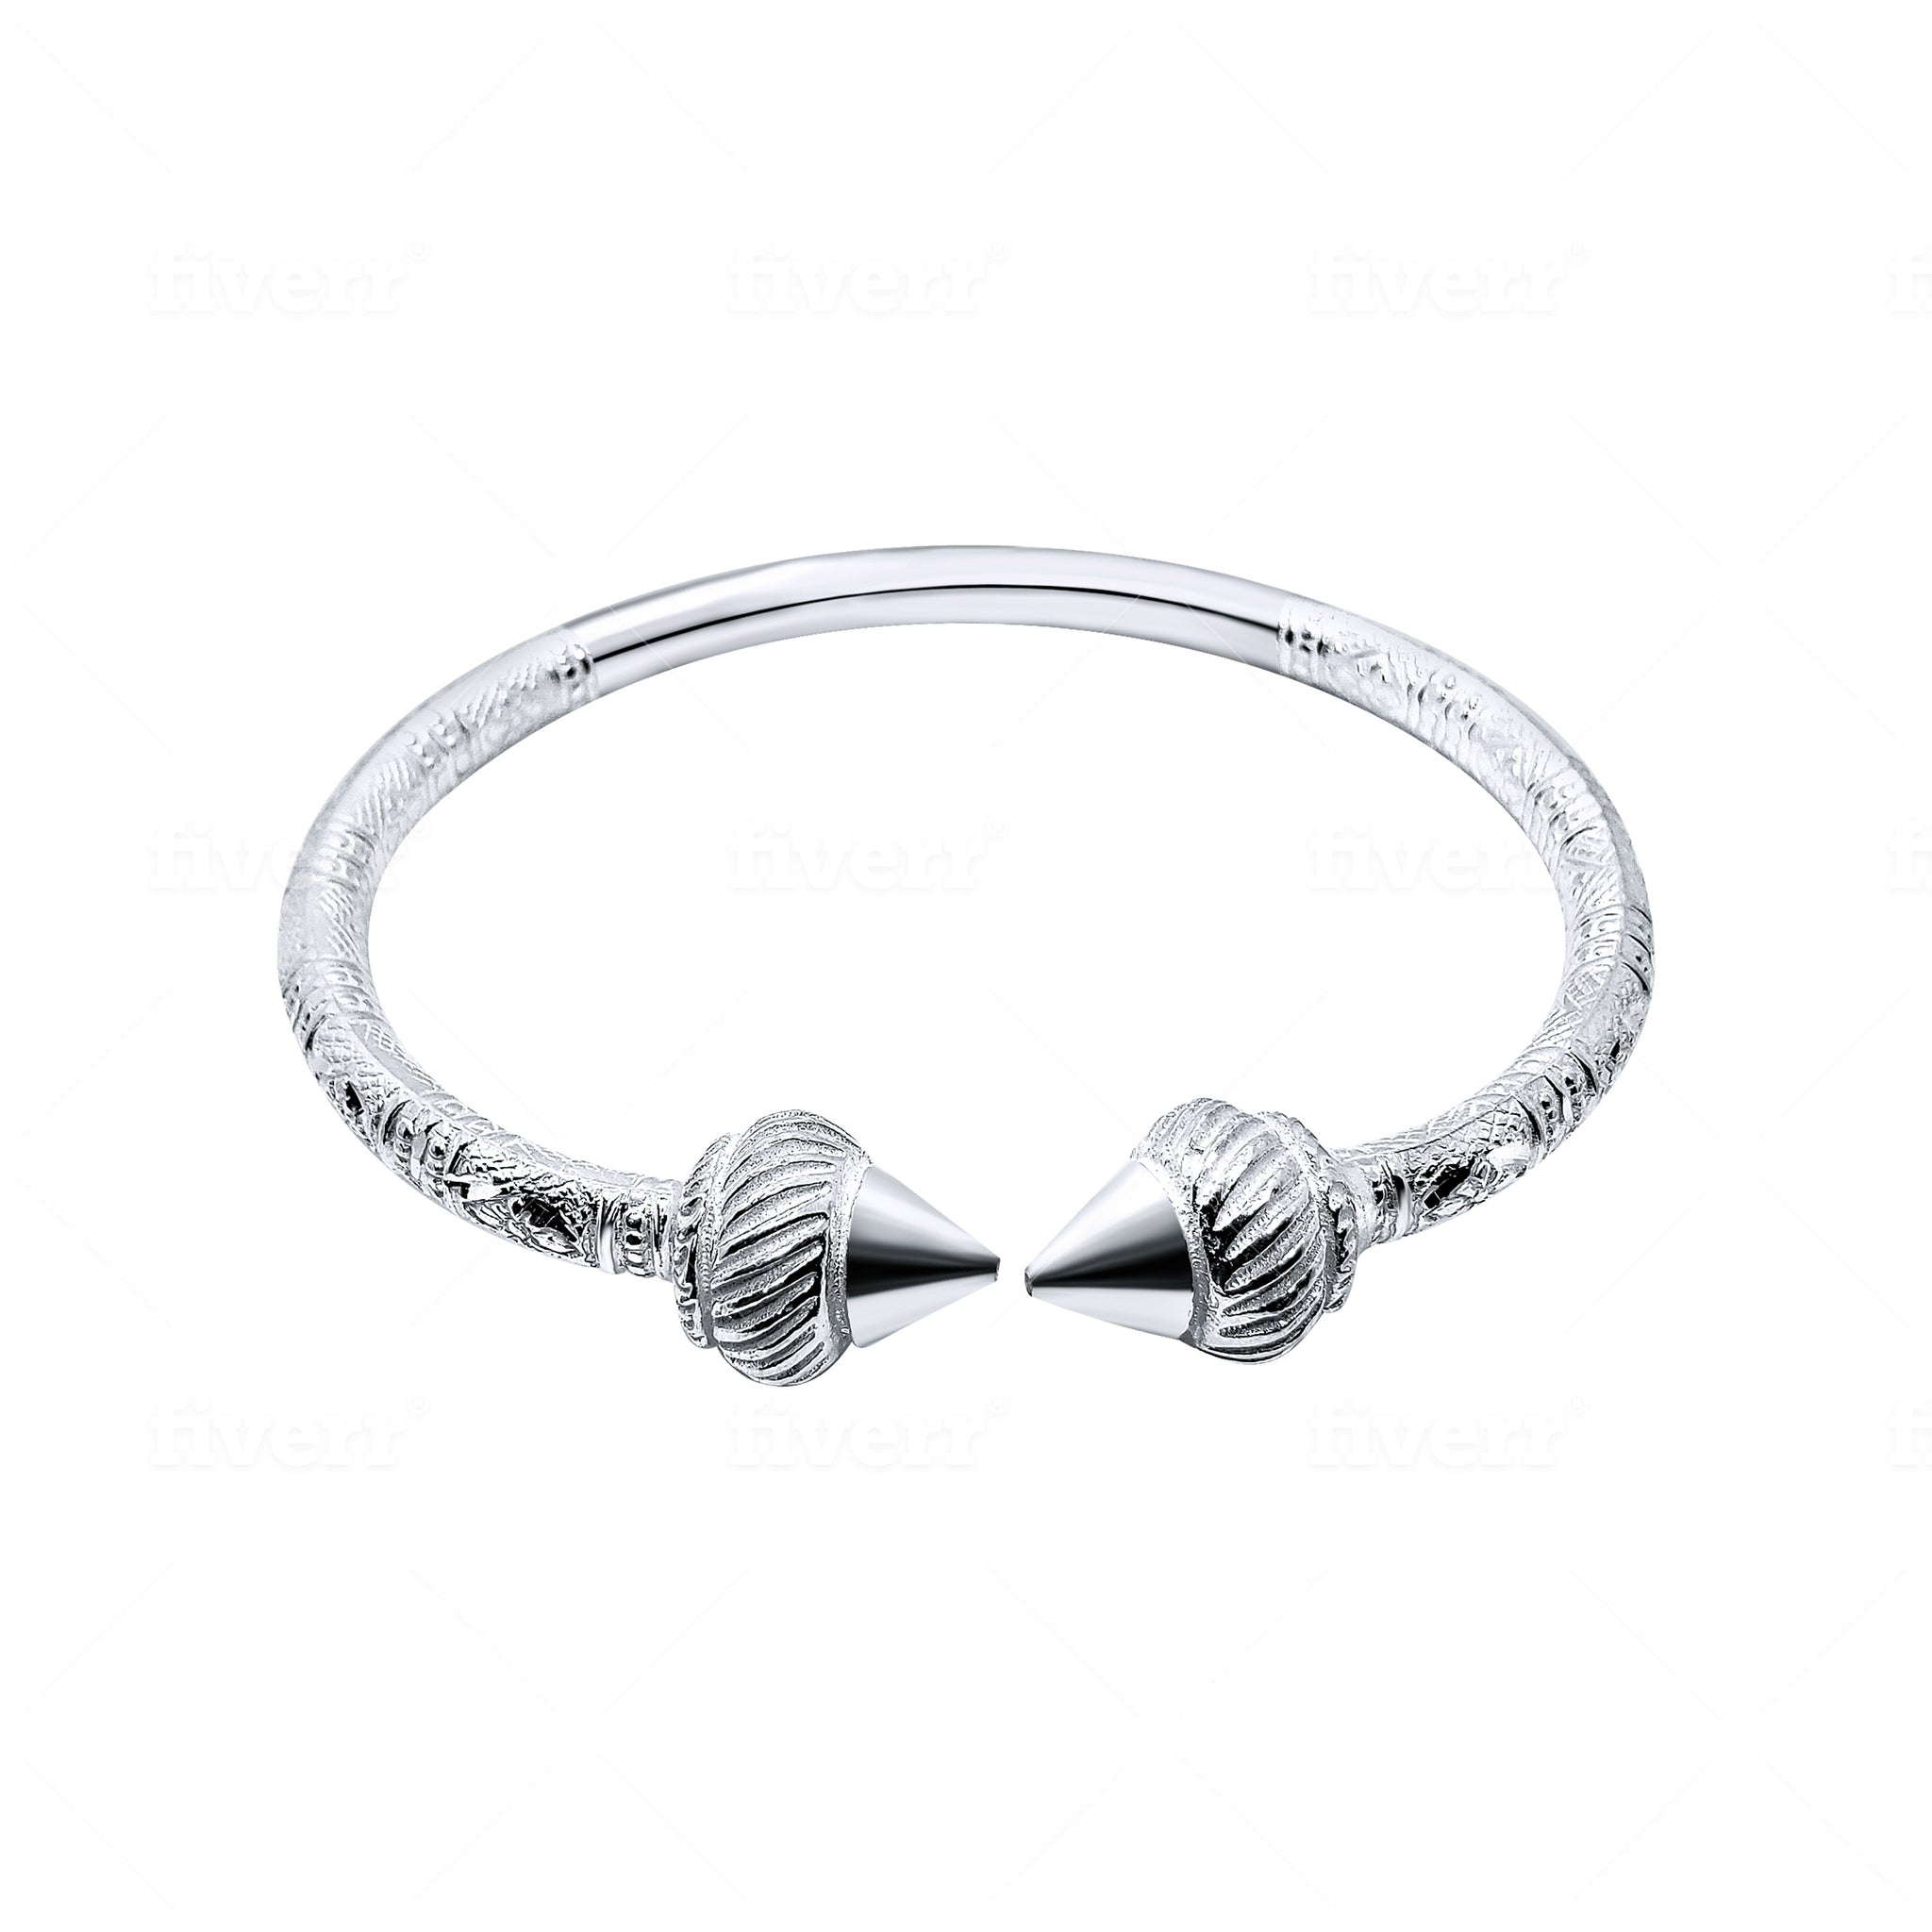 West Indian bangle collection. Sterling .925